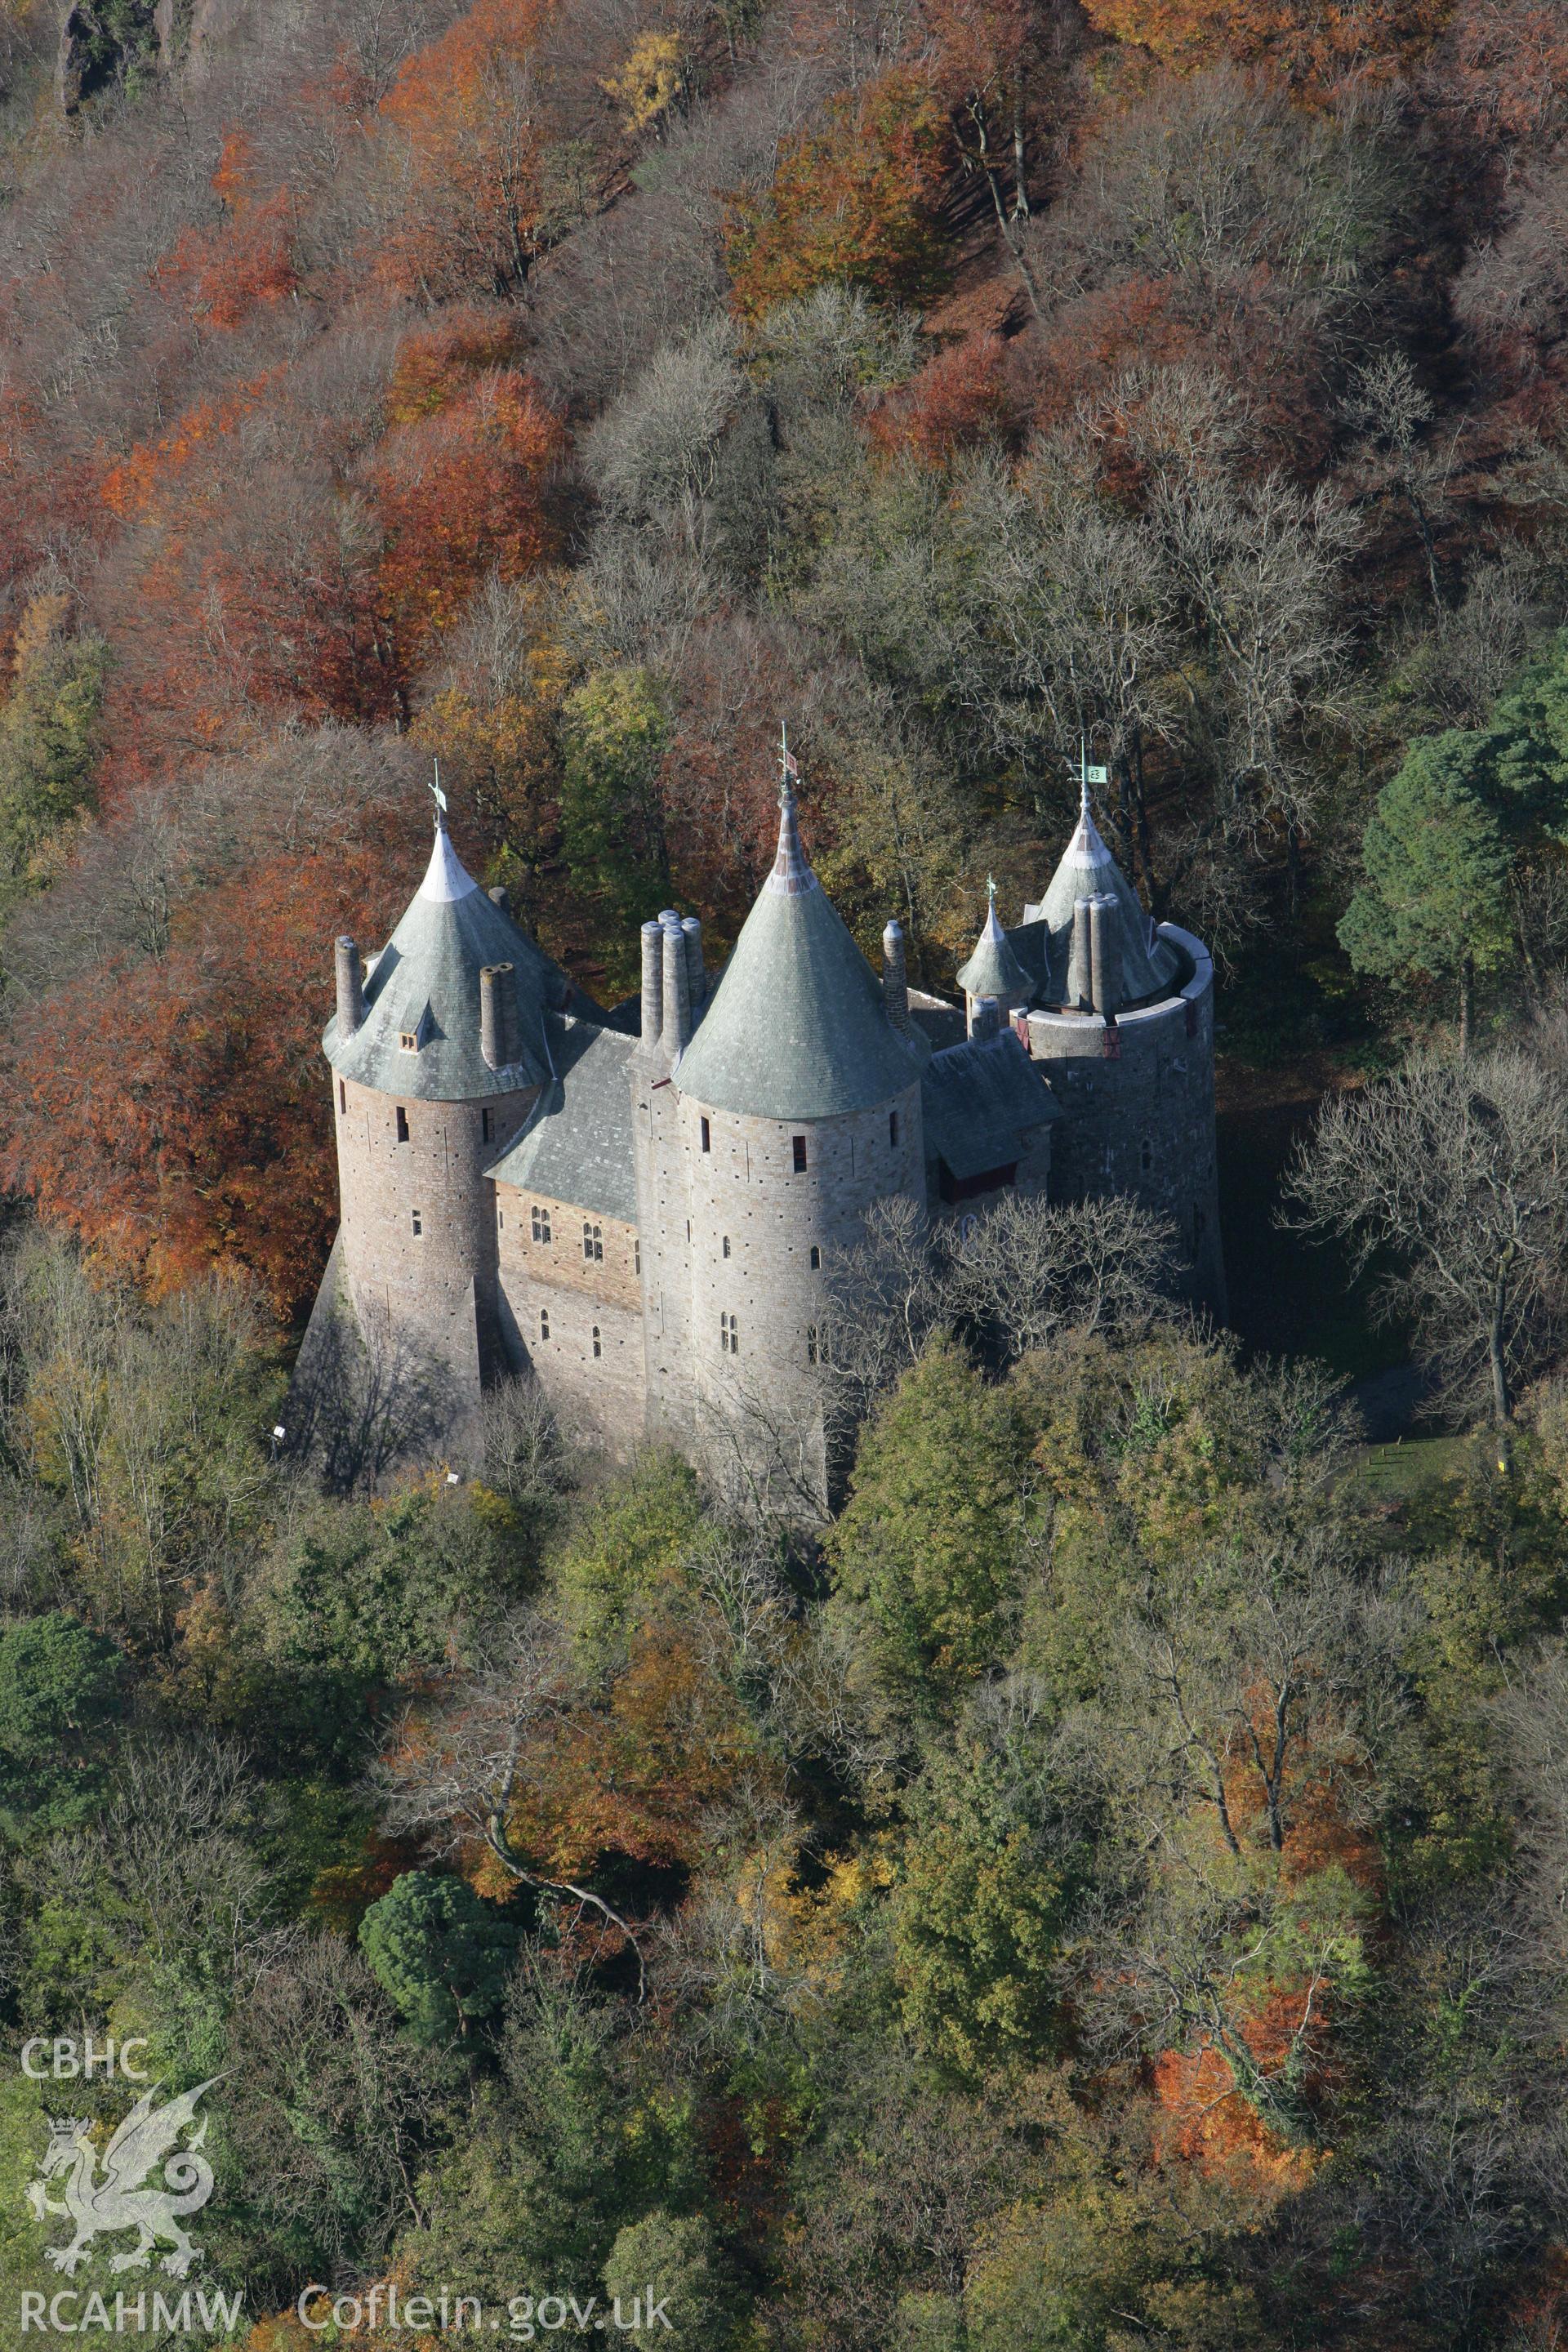 RCAHMW colour oblique photograph of Castell Coch, Tongwynlais. Taken by Toby Driver on 12/11/2008.